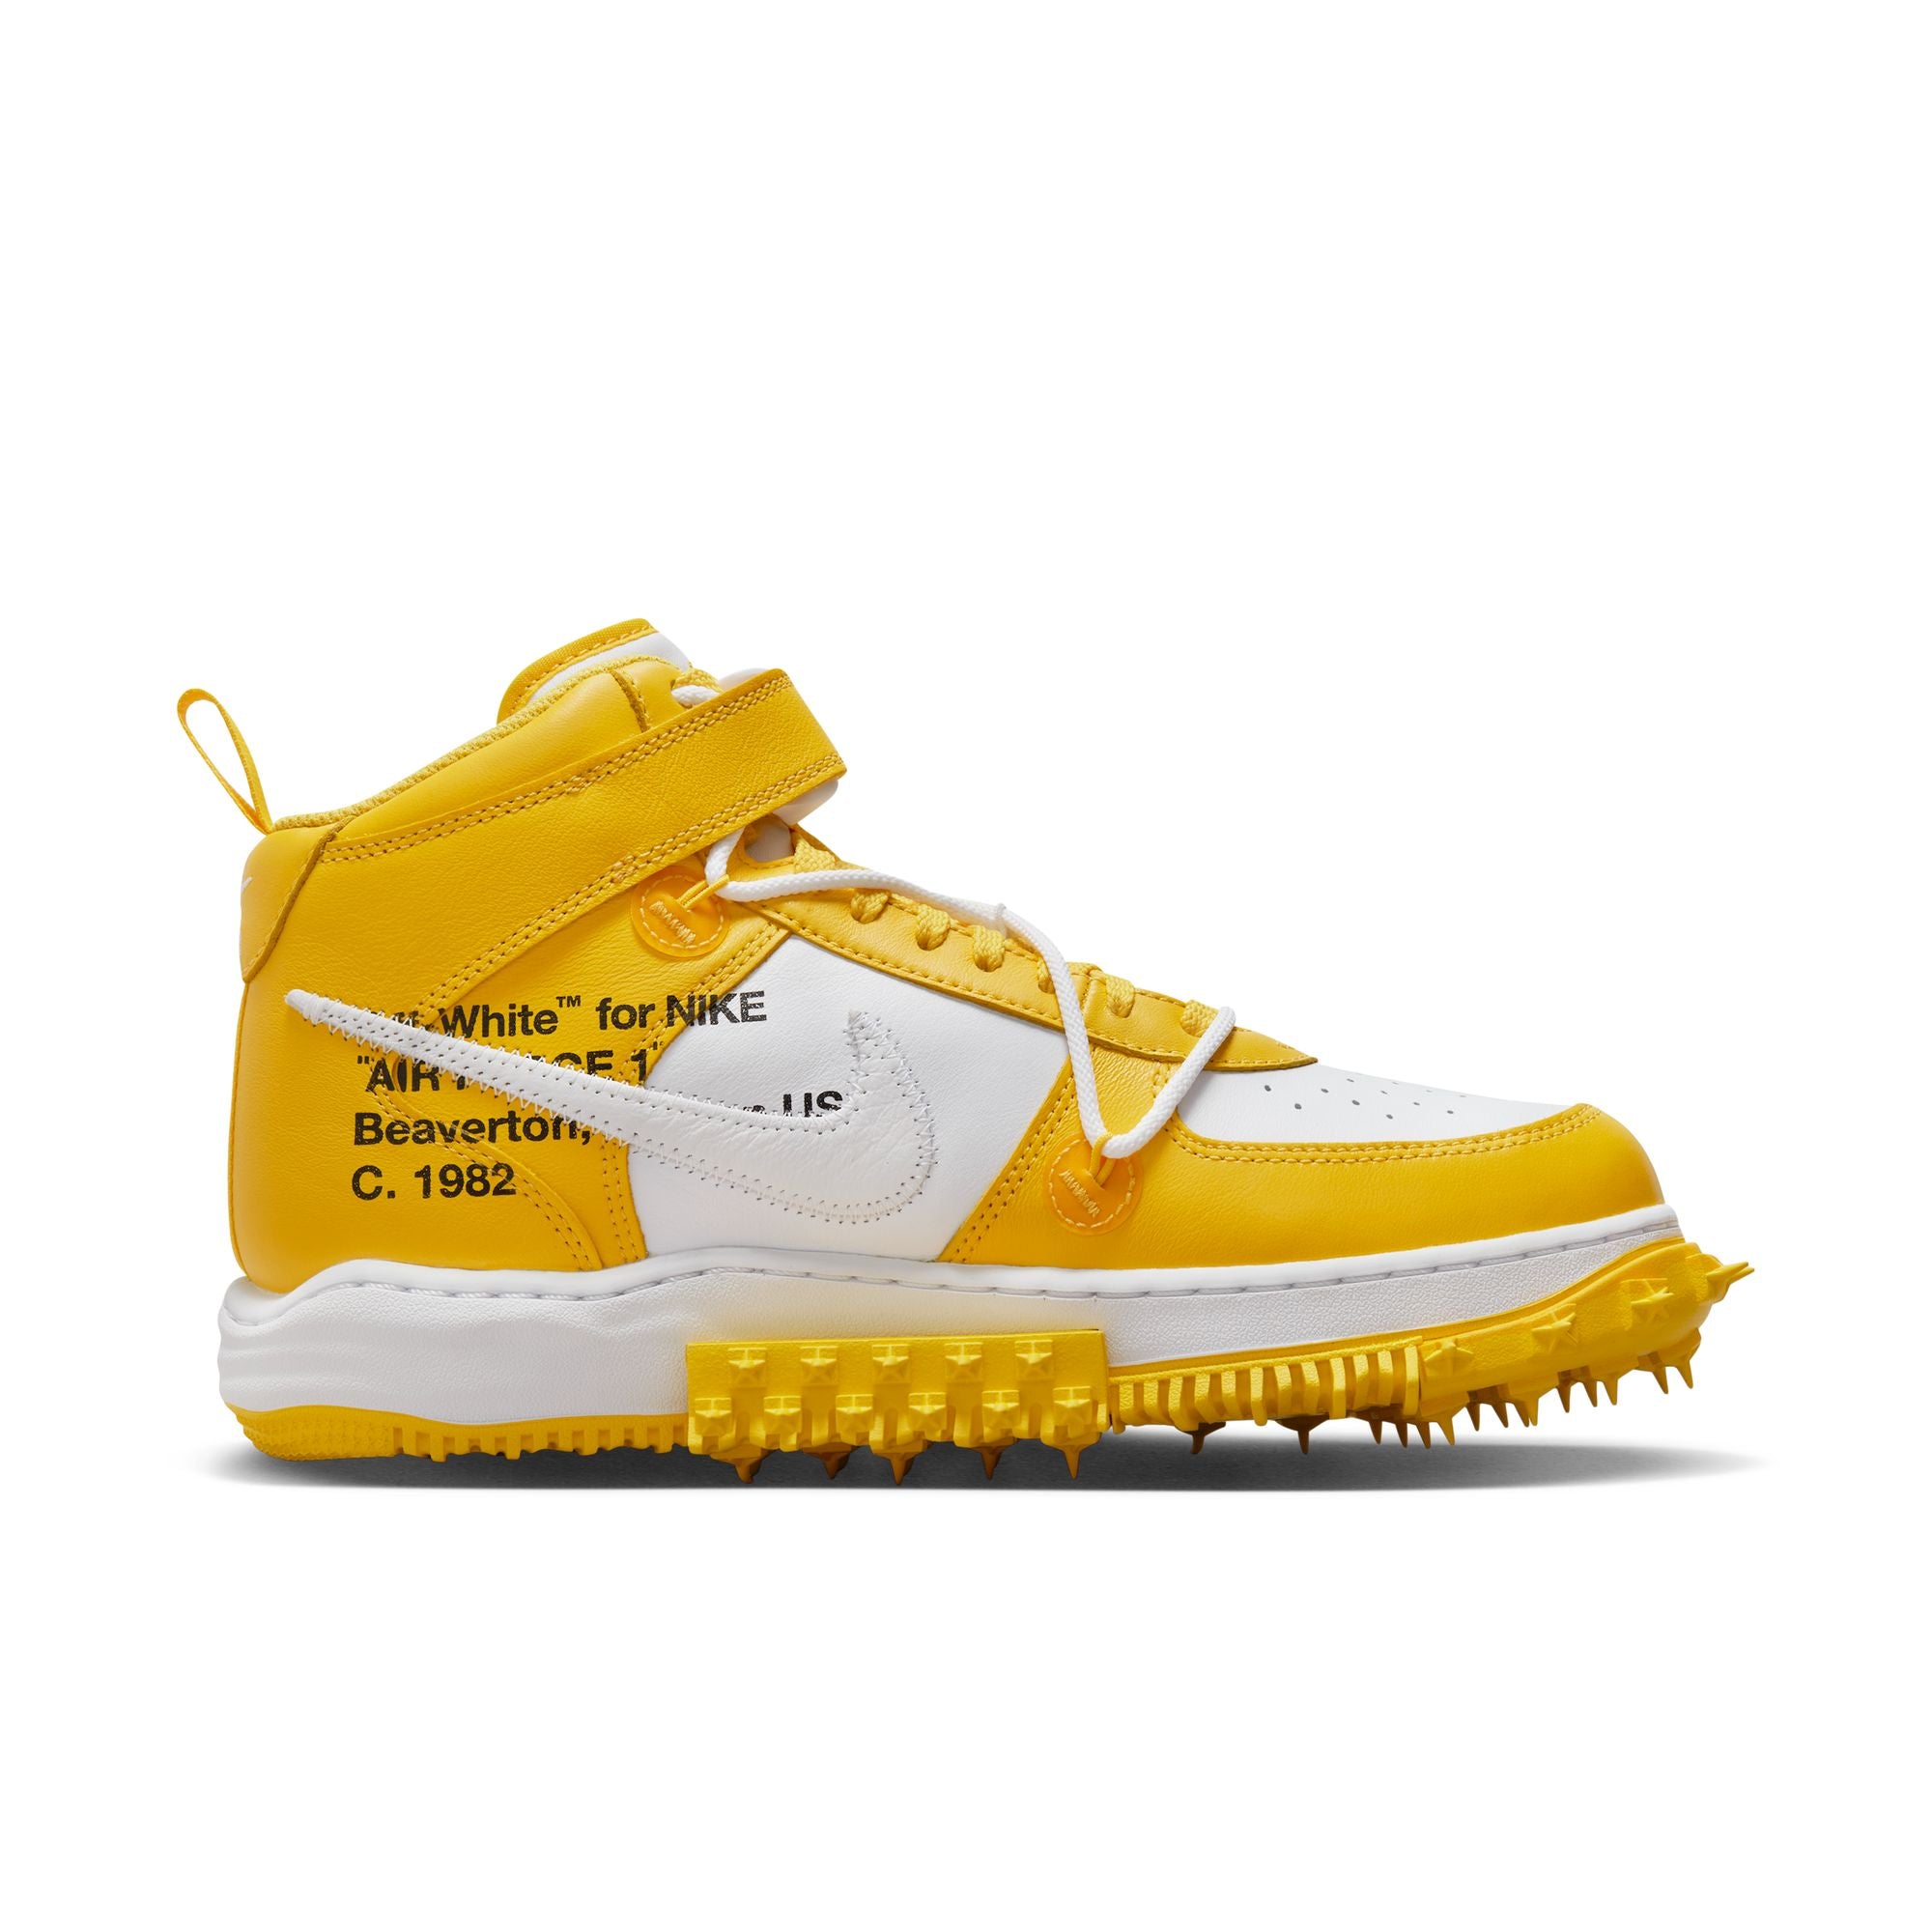 NIKE - Air Force 1 Mid Sp Lthr - (White/White-Varsity Maize) view 1